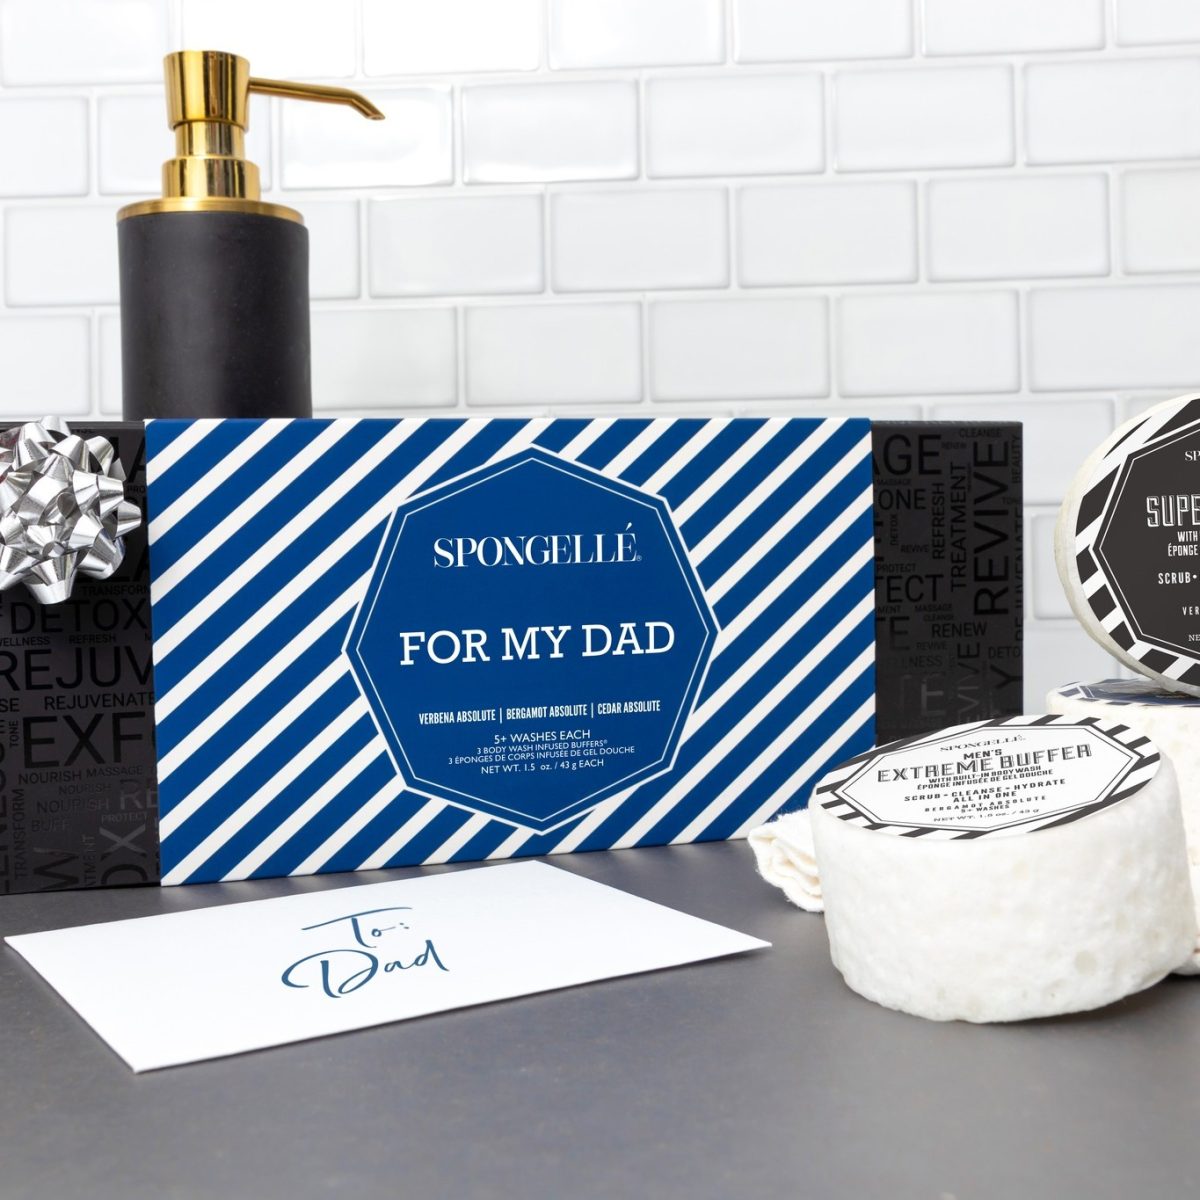 23 Inexpensive Father's Day Gifts That Won't Break The Bank